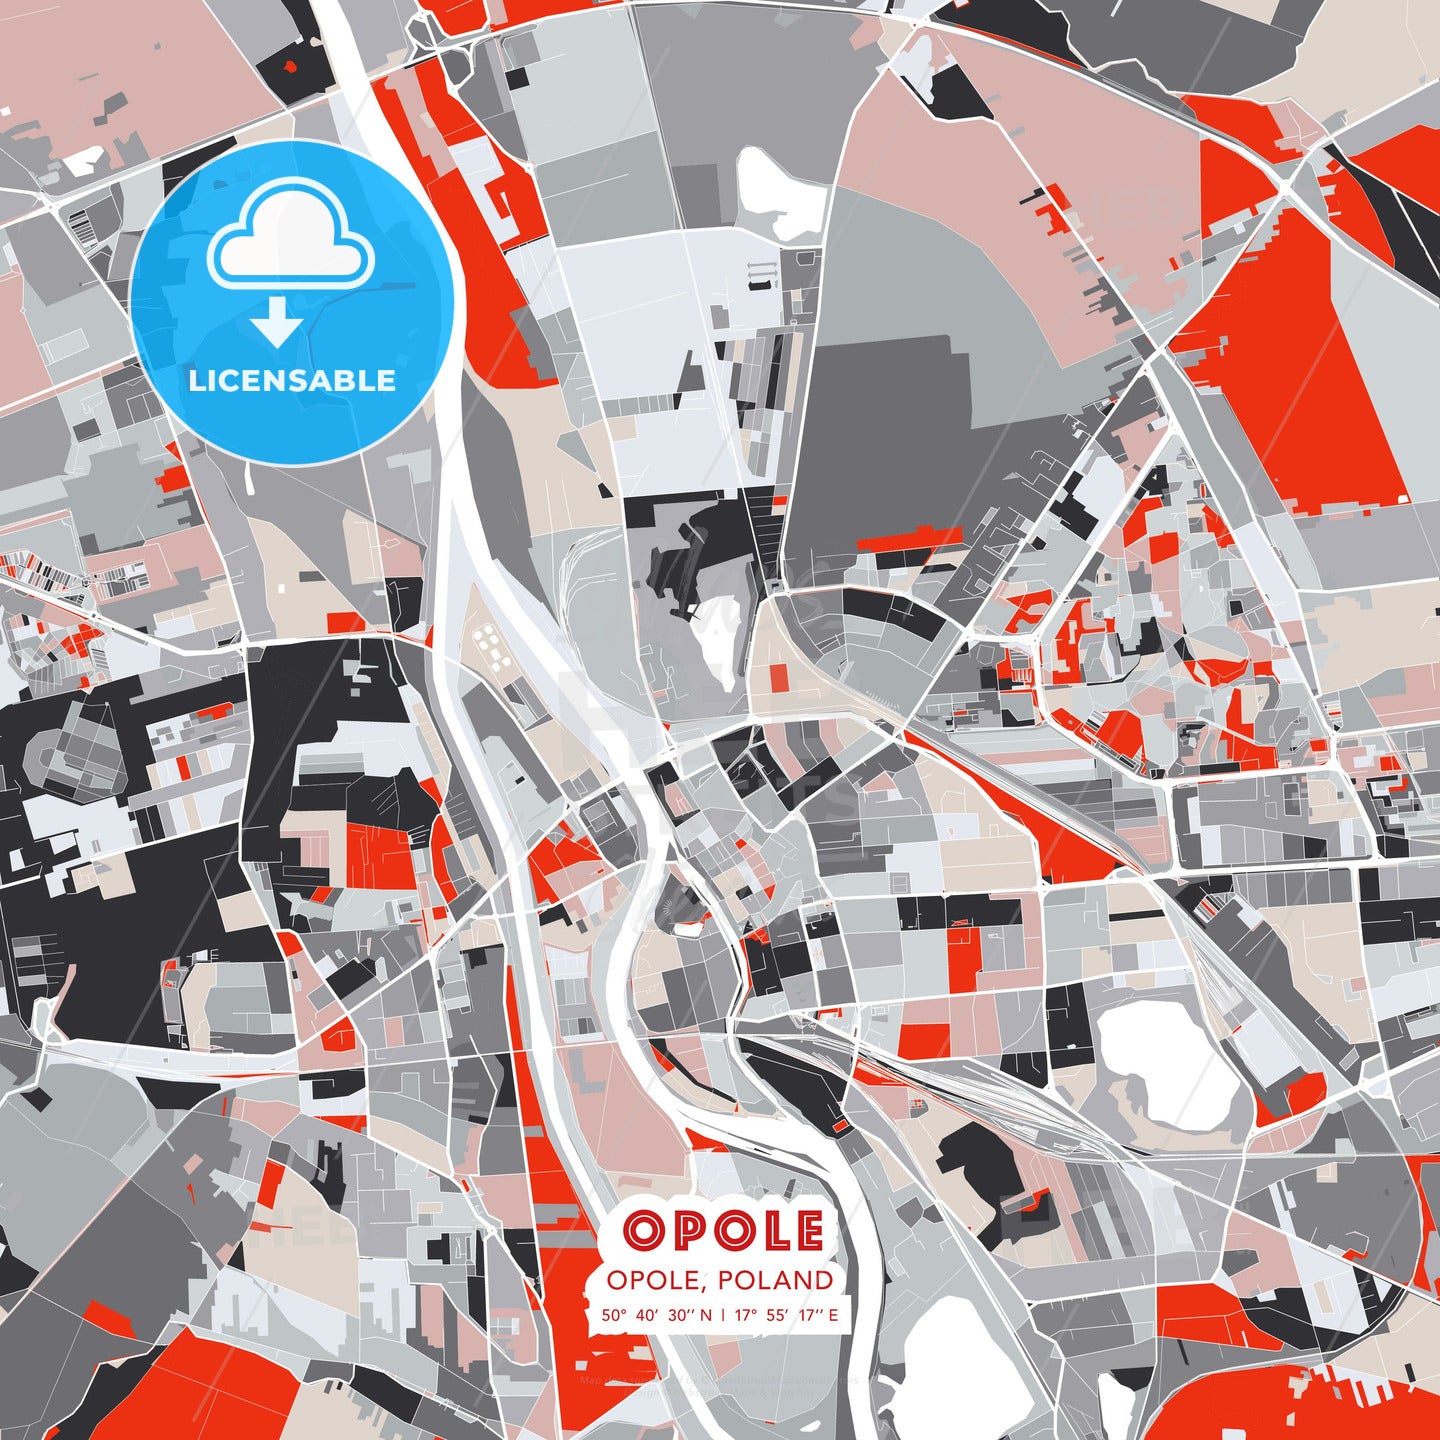 Opole, Opole, Poland, modern map - HEBSTREITS Sketches